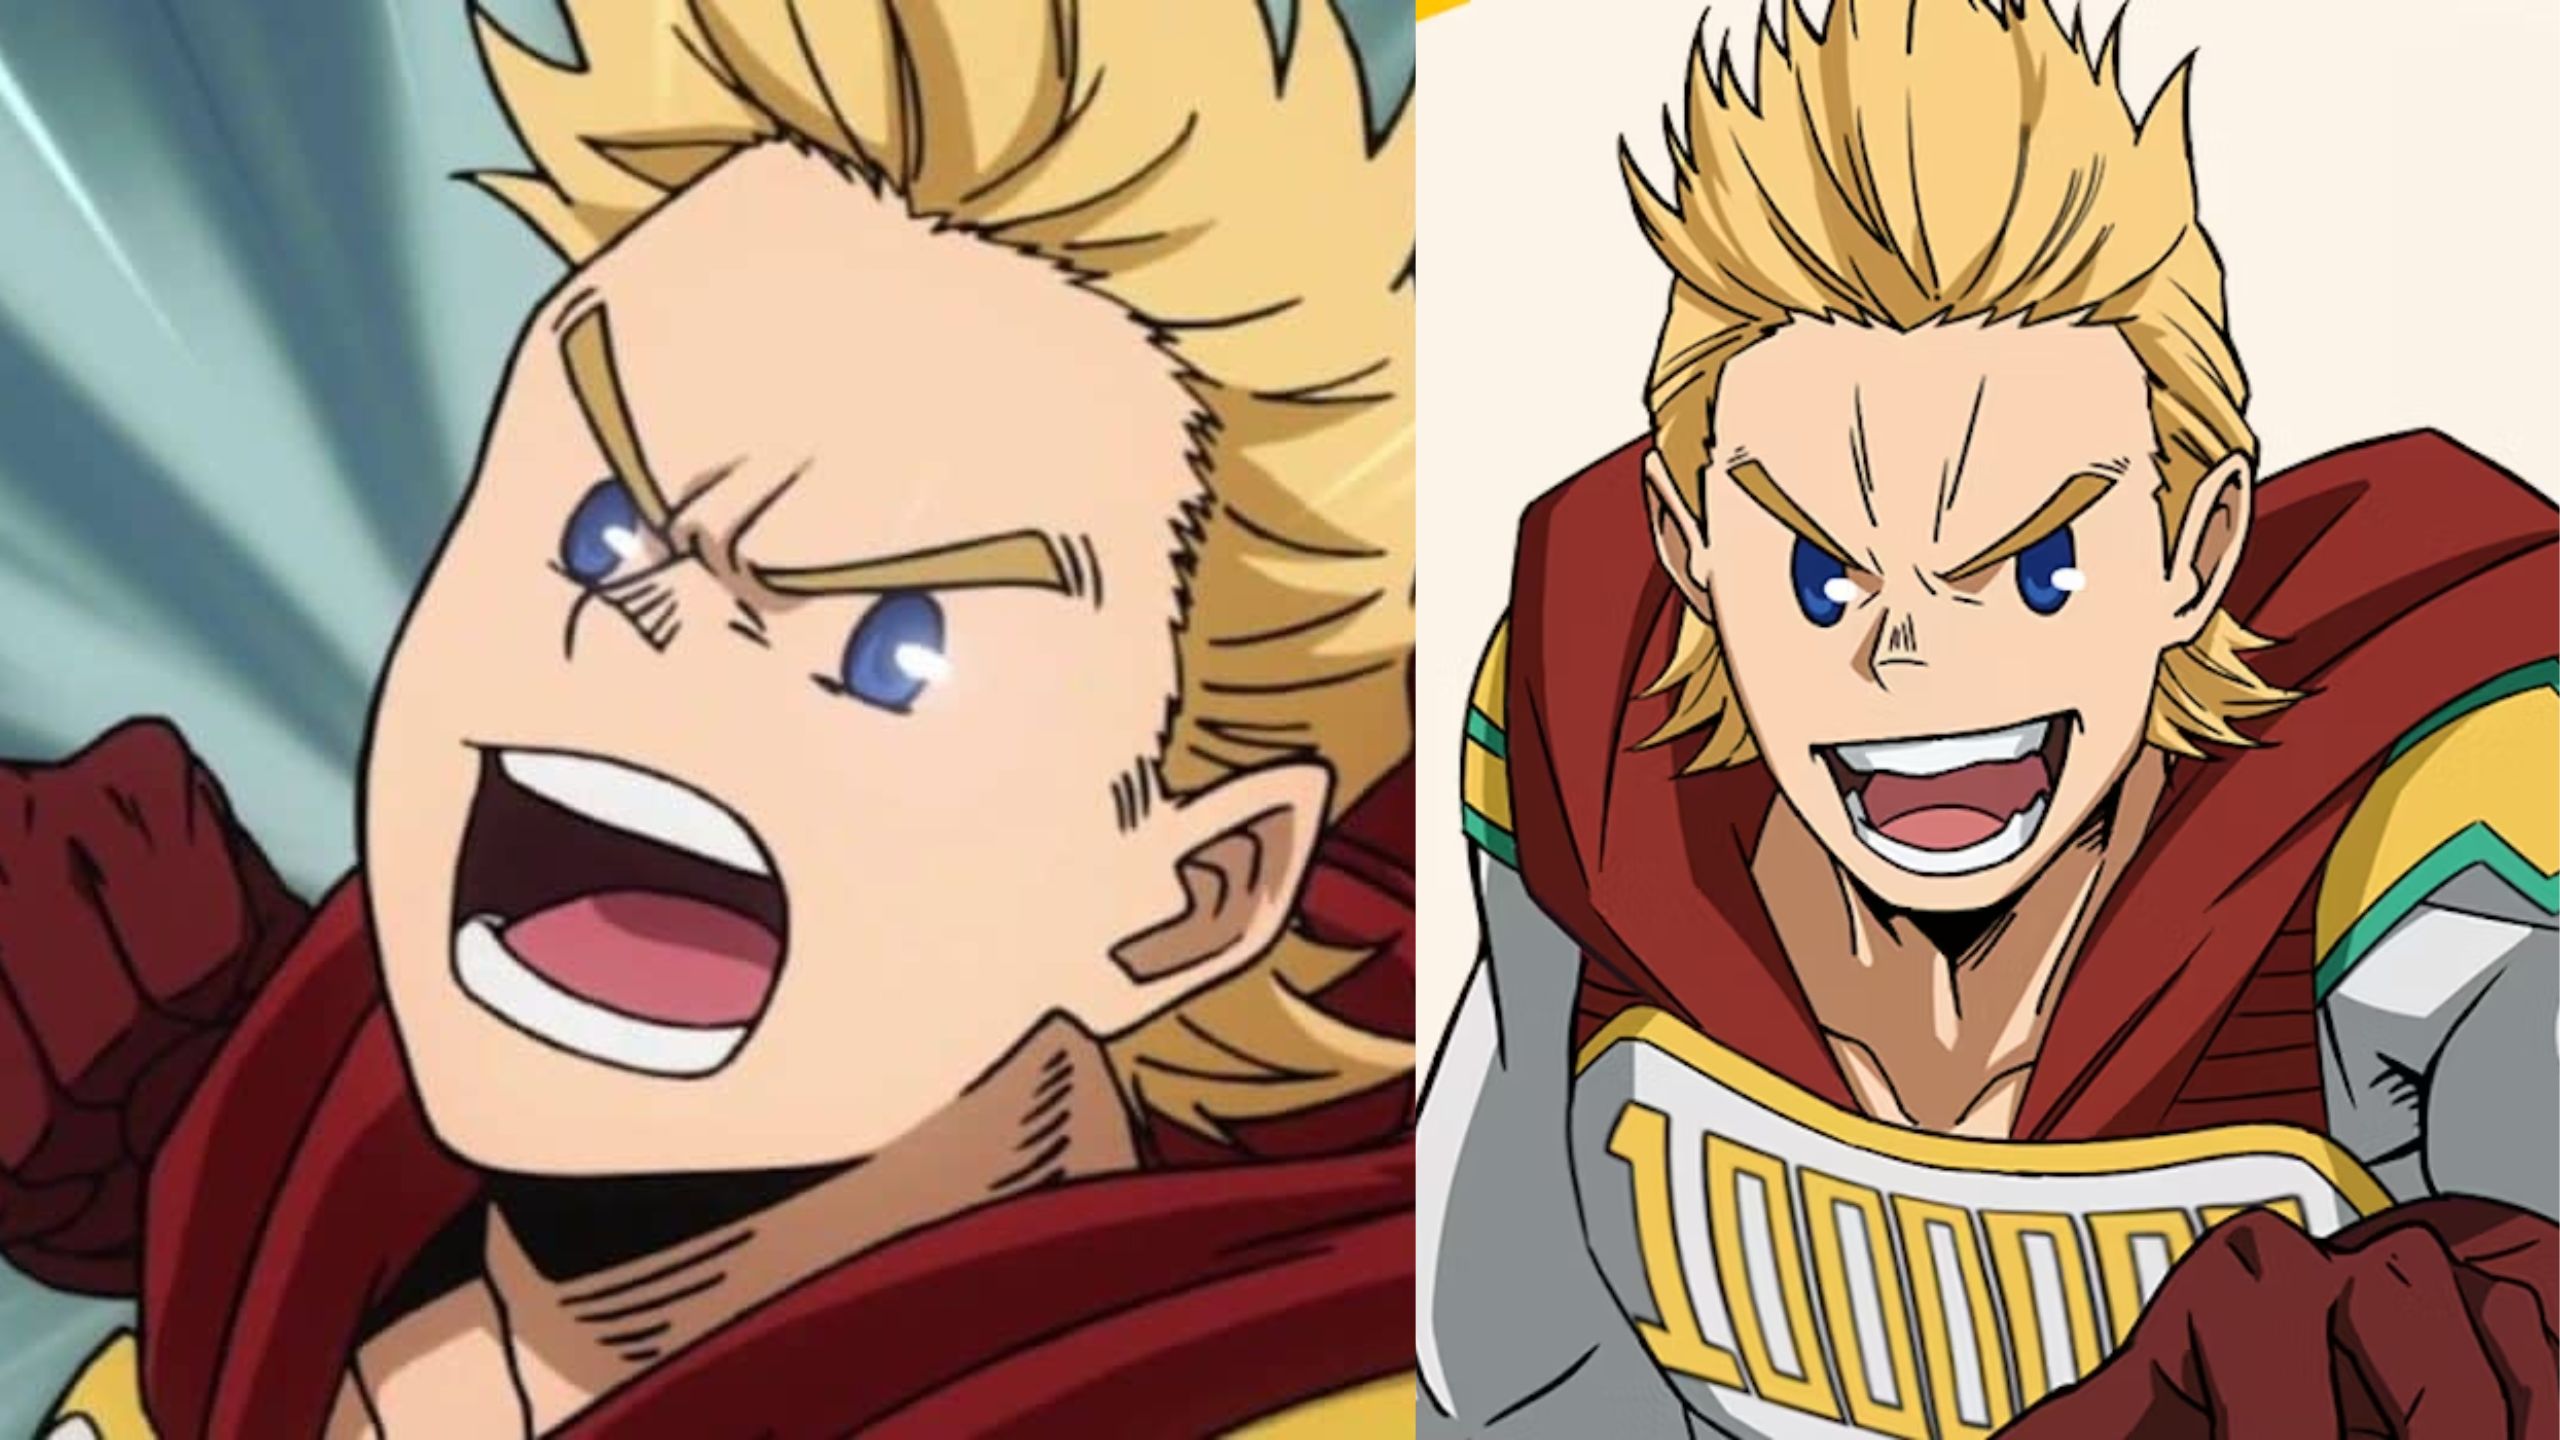 Choosing One For All: Why These My Hero Academia Characters Are Perfect Fits